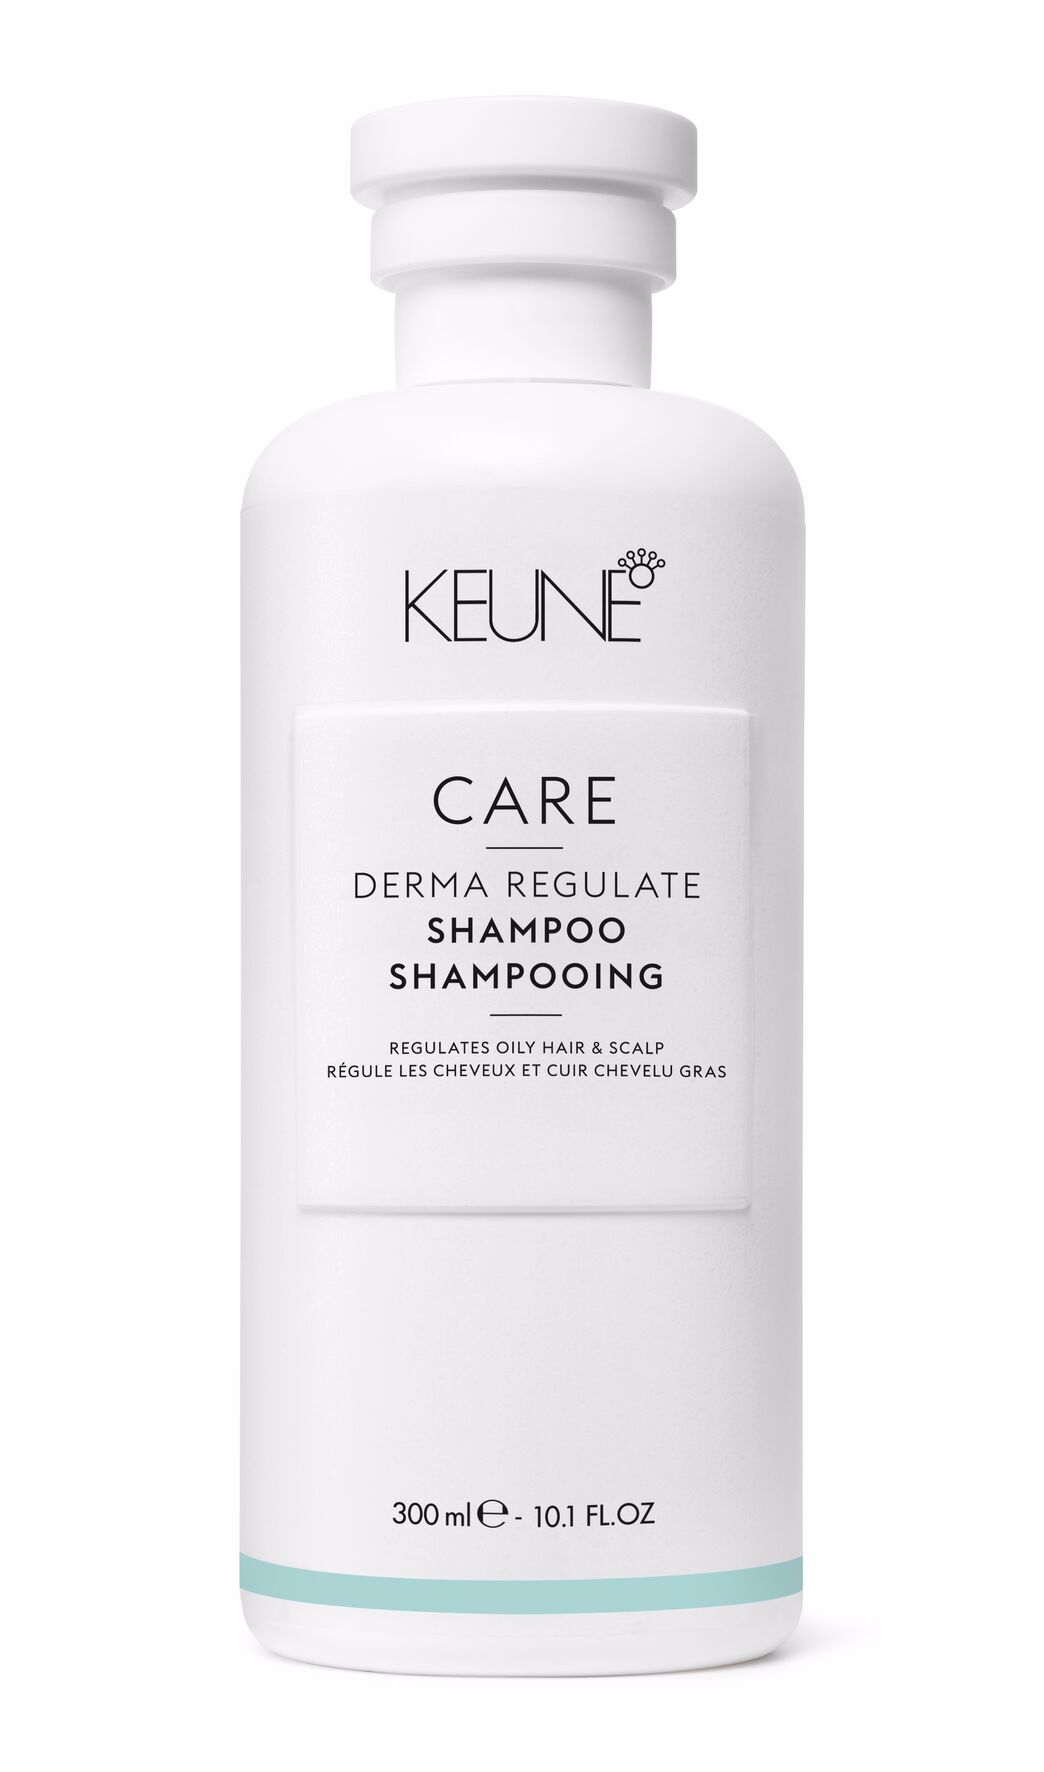 Discover Derma Regulate Shampoo: The ideal hair product for oily hair. Effective hair cleansing, silicone-free, scalp soothing, refreshing sensation, smooth hair, natural balance. On keune.ch.